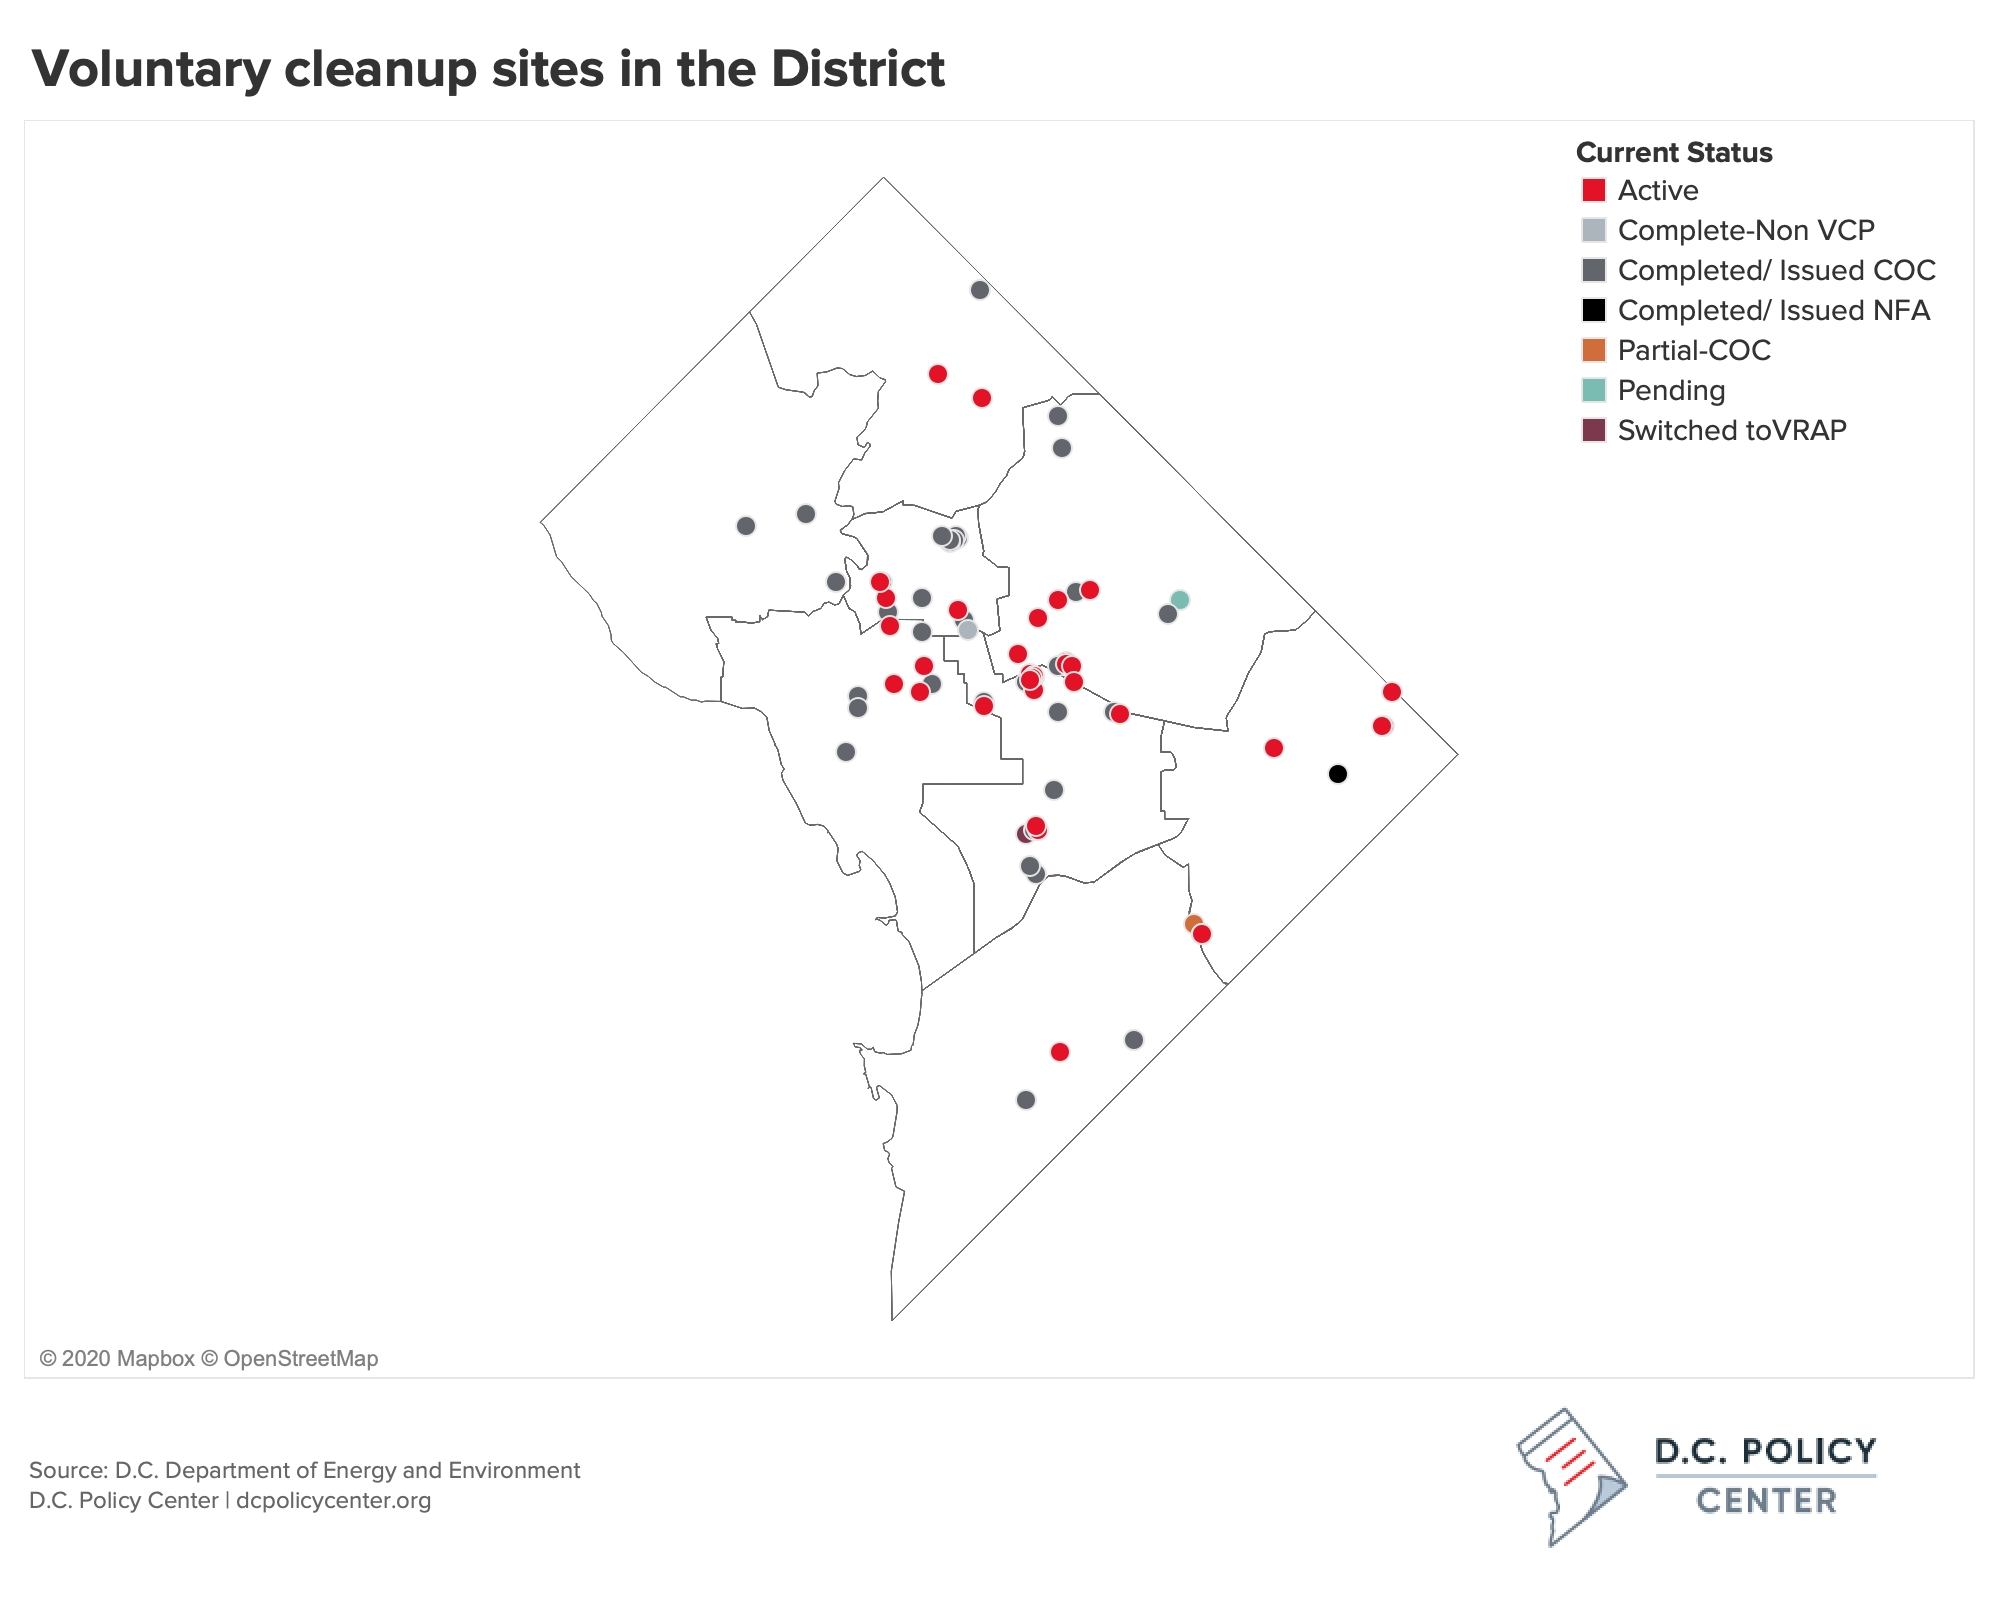 map of voluntary cleanup sites by status in DC, showing a concentration in ward 6